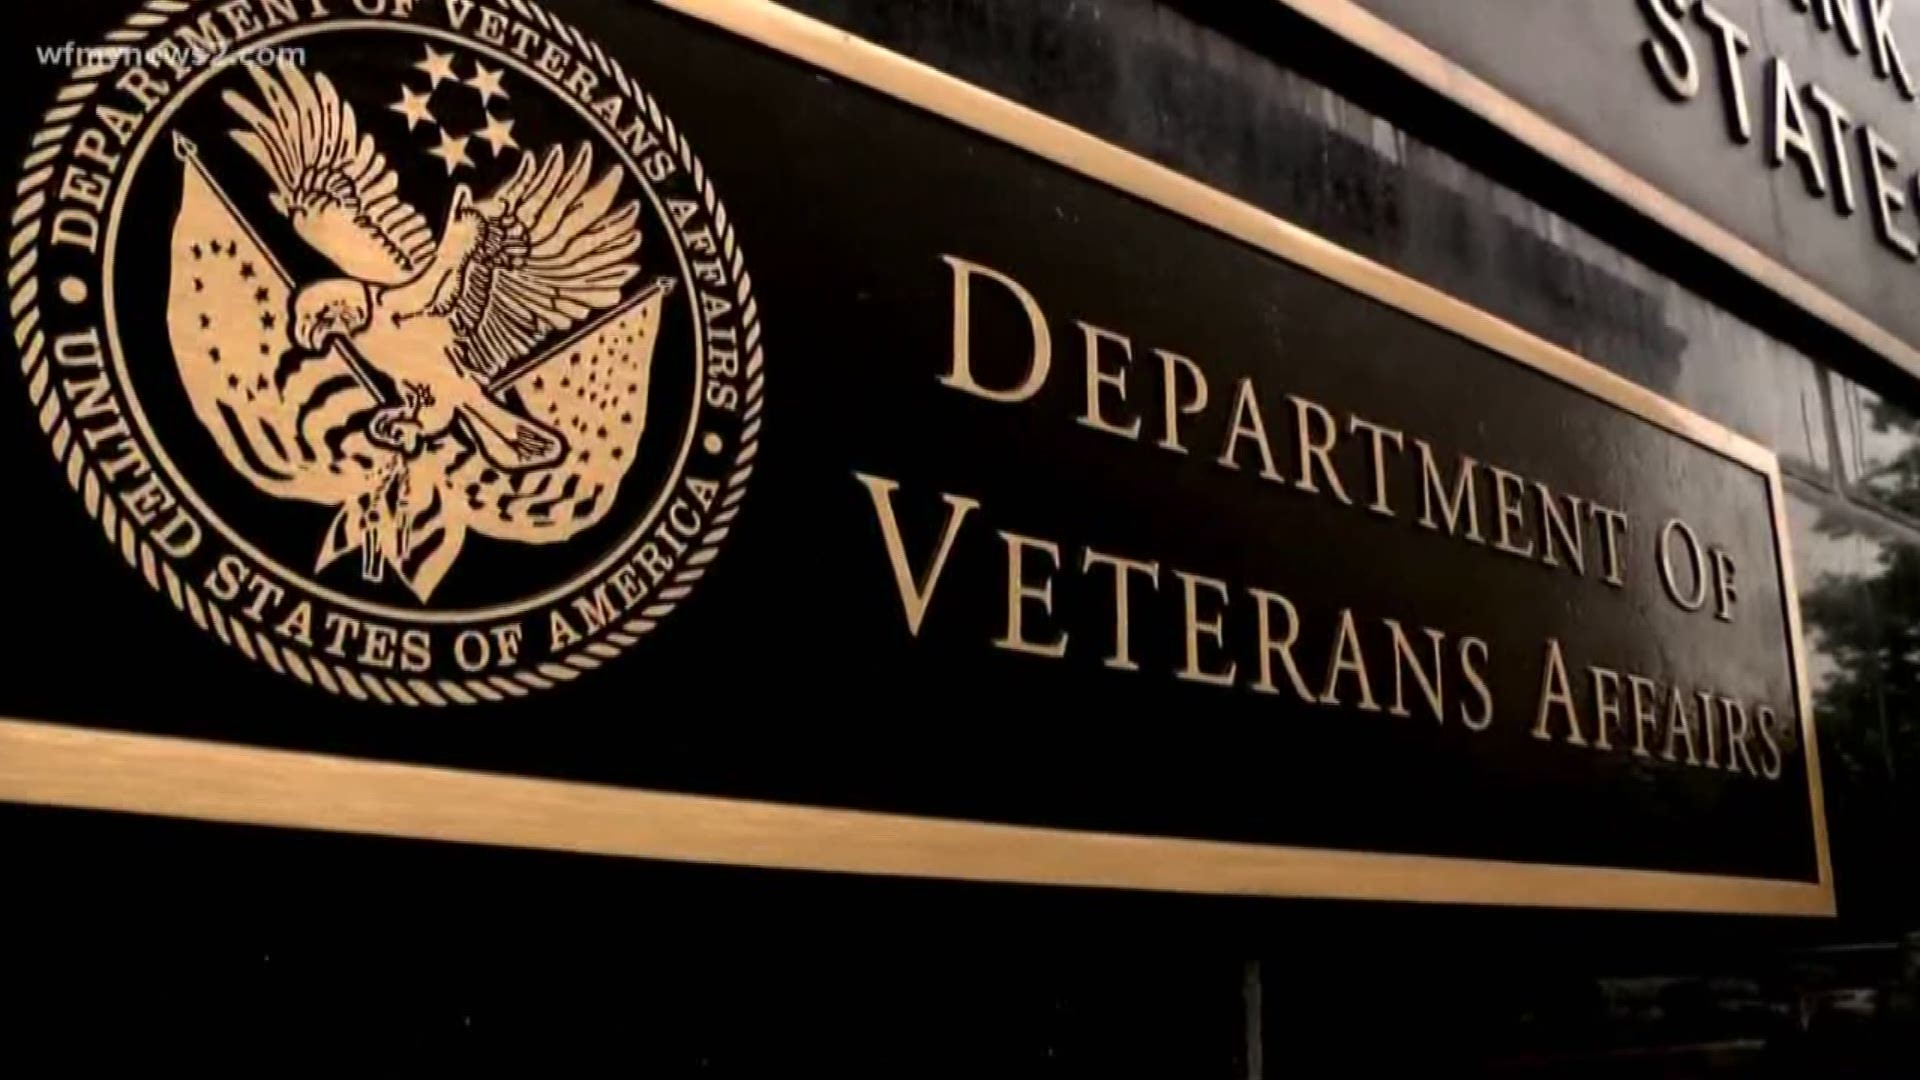 The company charged a veteran thousands of dollars for a service he could get for free from his local VA.